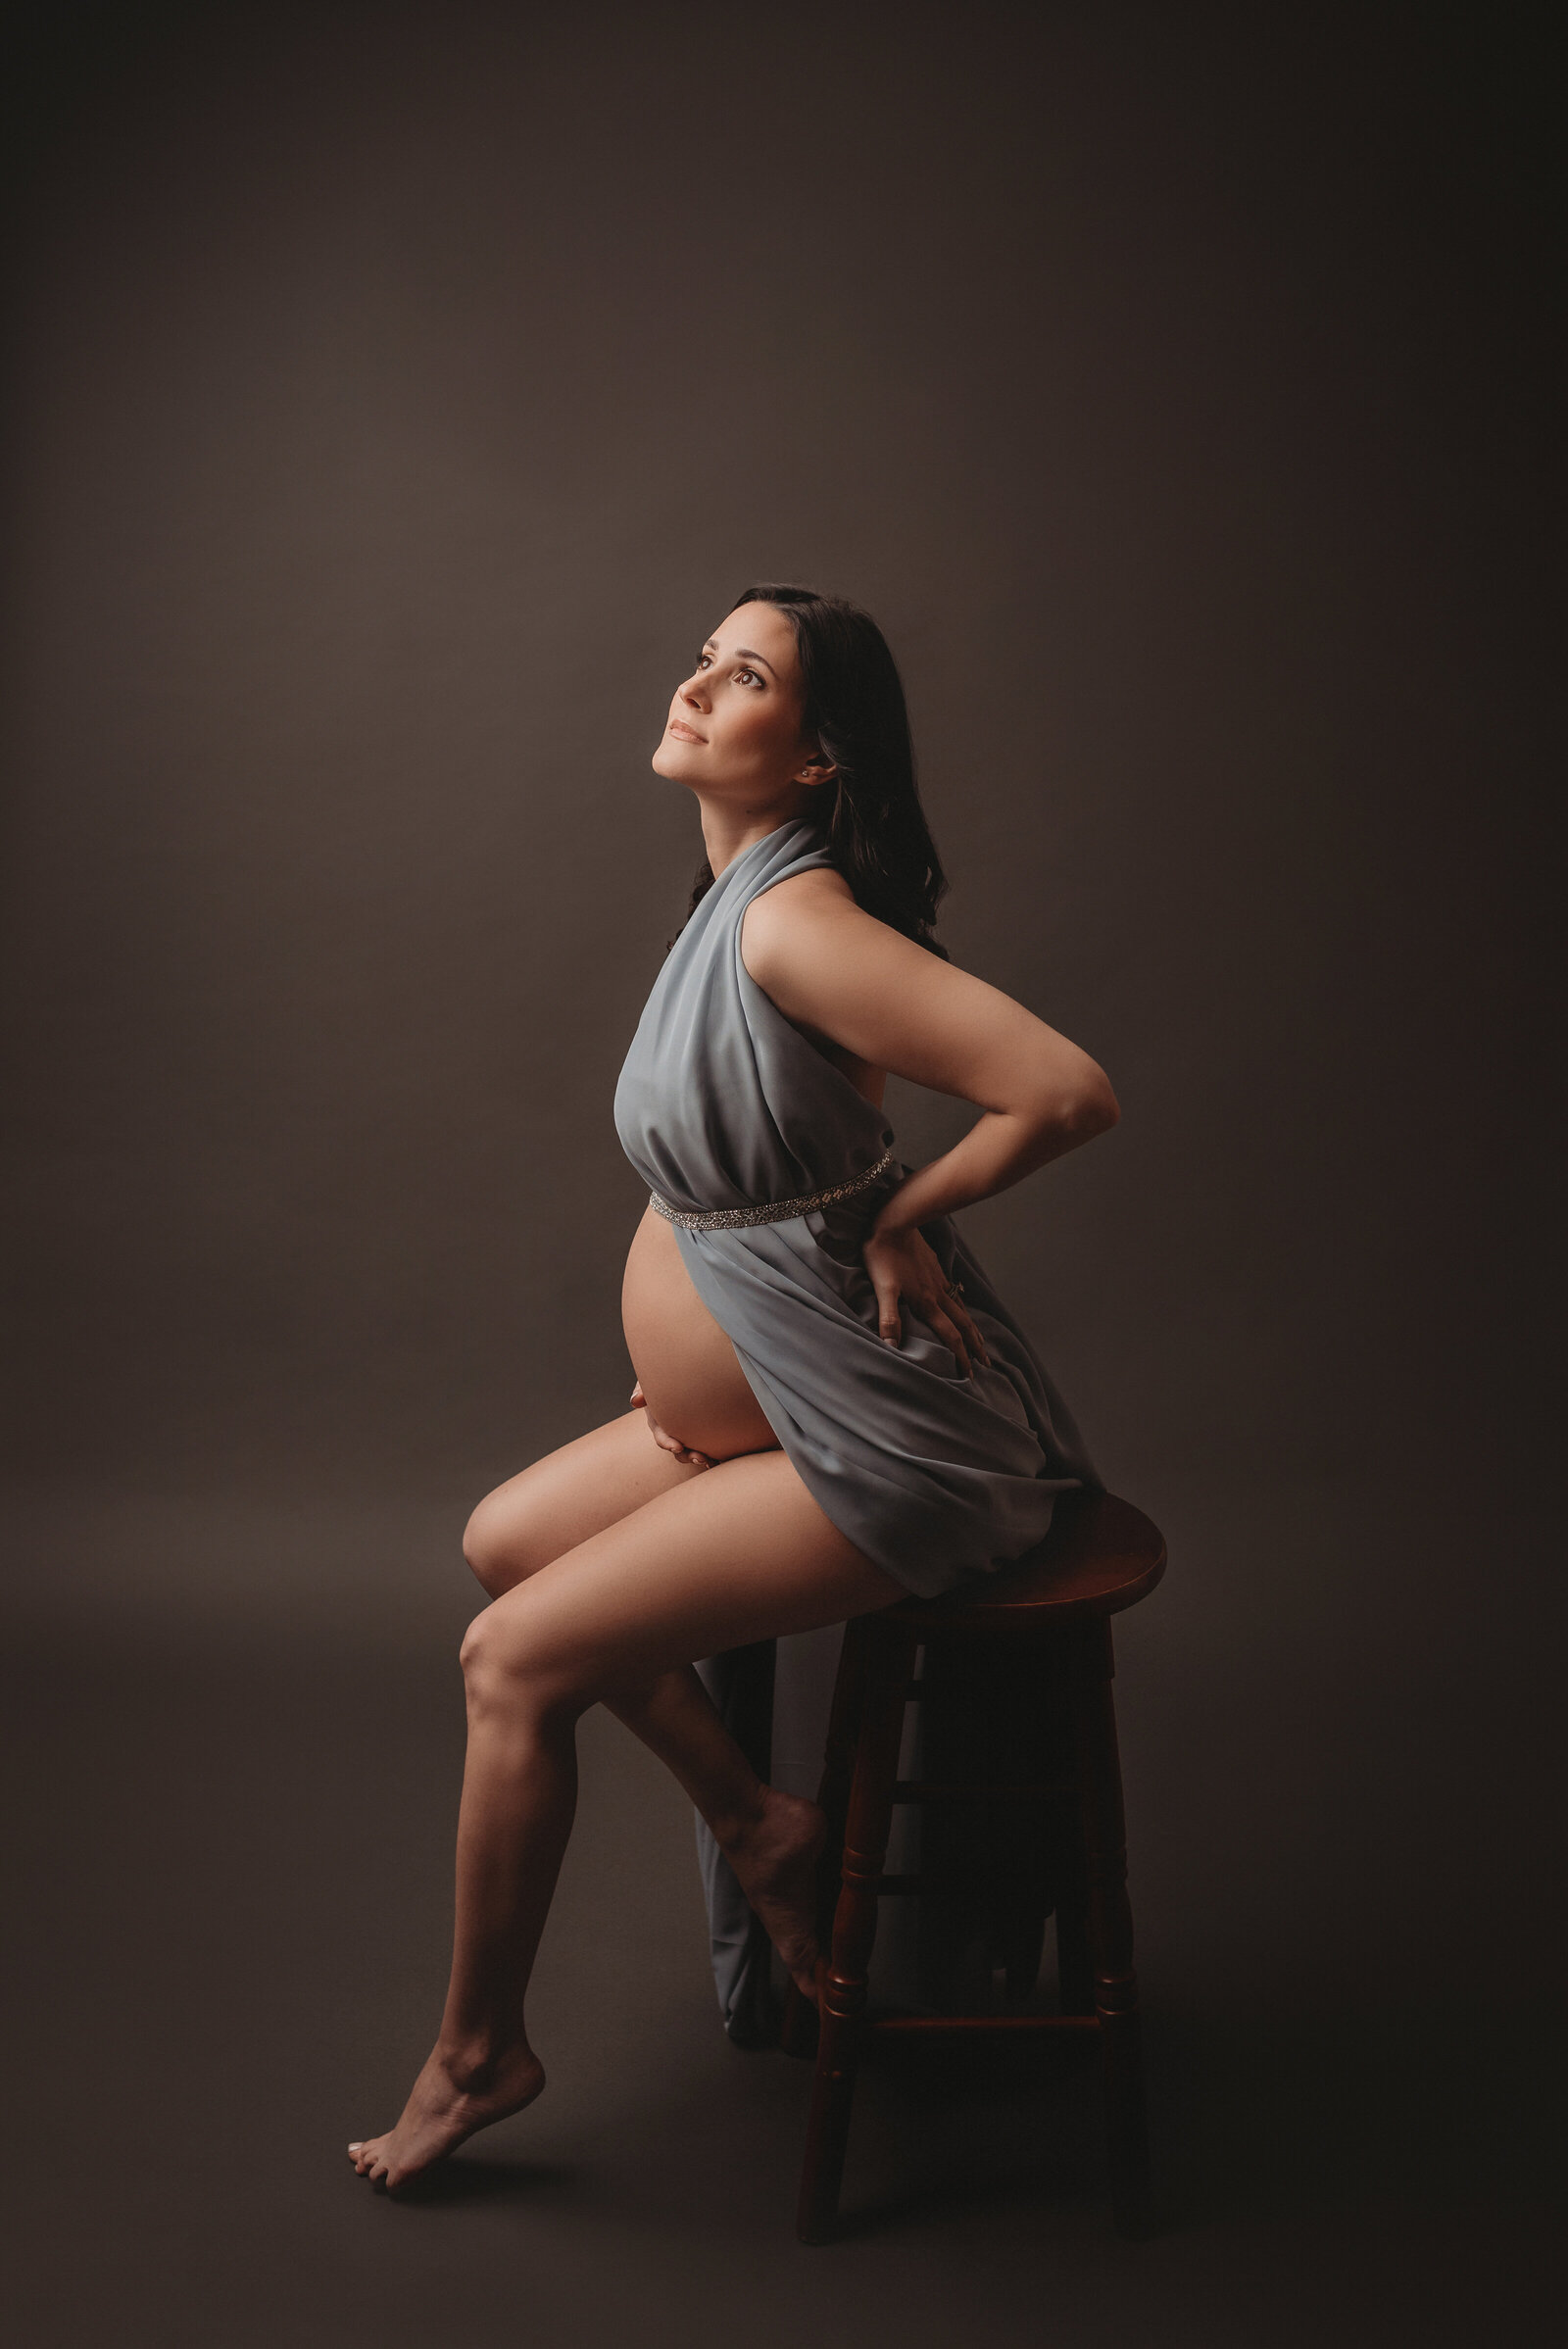 Milton GA maternity photographer captures 35 week maternity photography pose with mom sitting on stool in blue chiffon fabric showing stomach holding onto it and looking up at ceiling